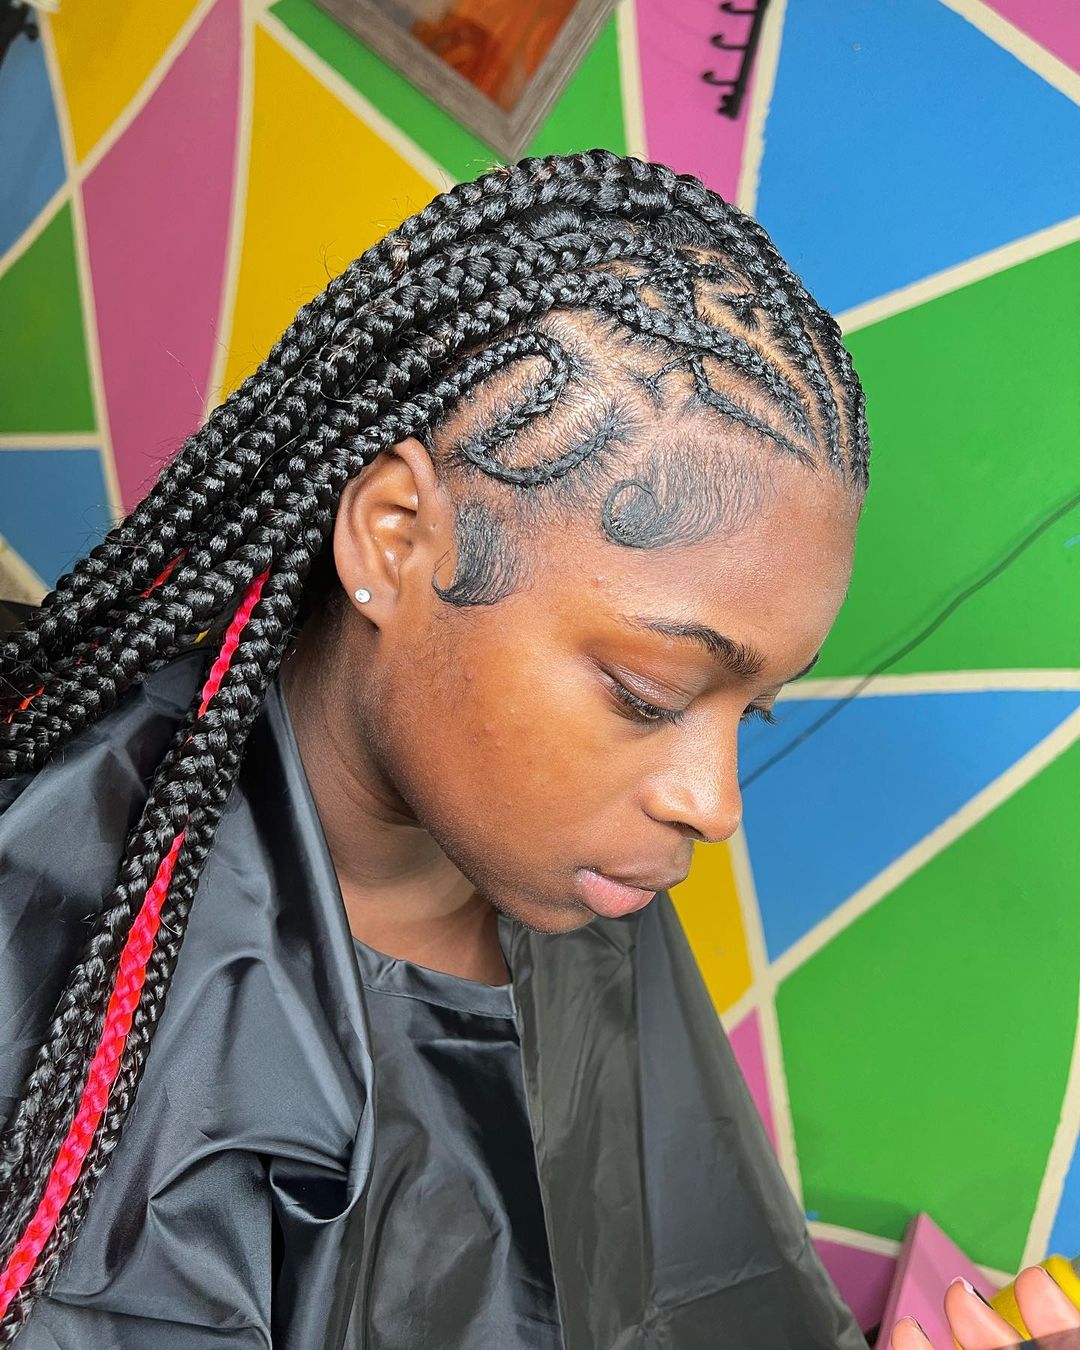 Retouch On The Front Braids With Half-Feedings, Half-Box Braids